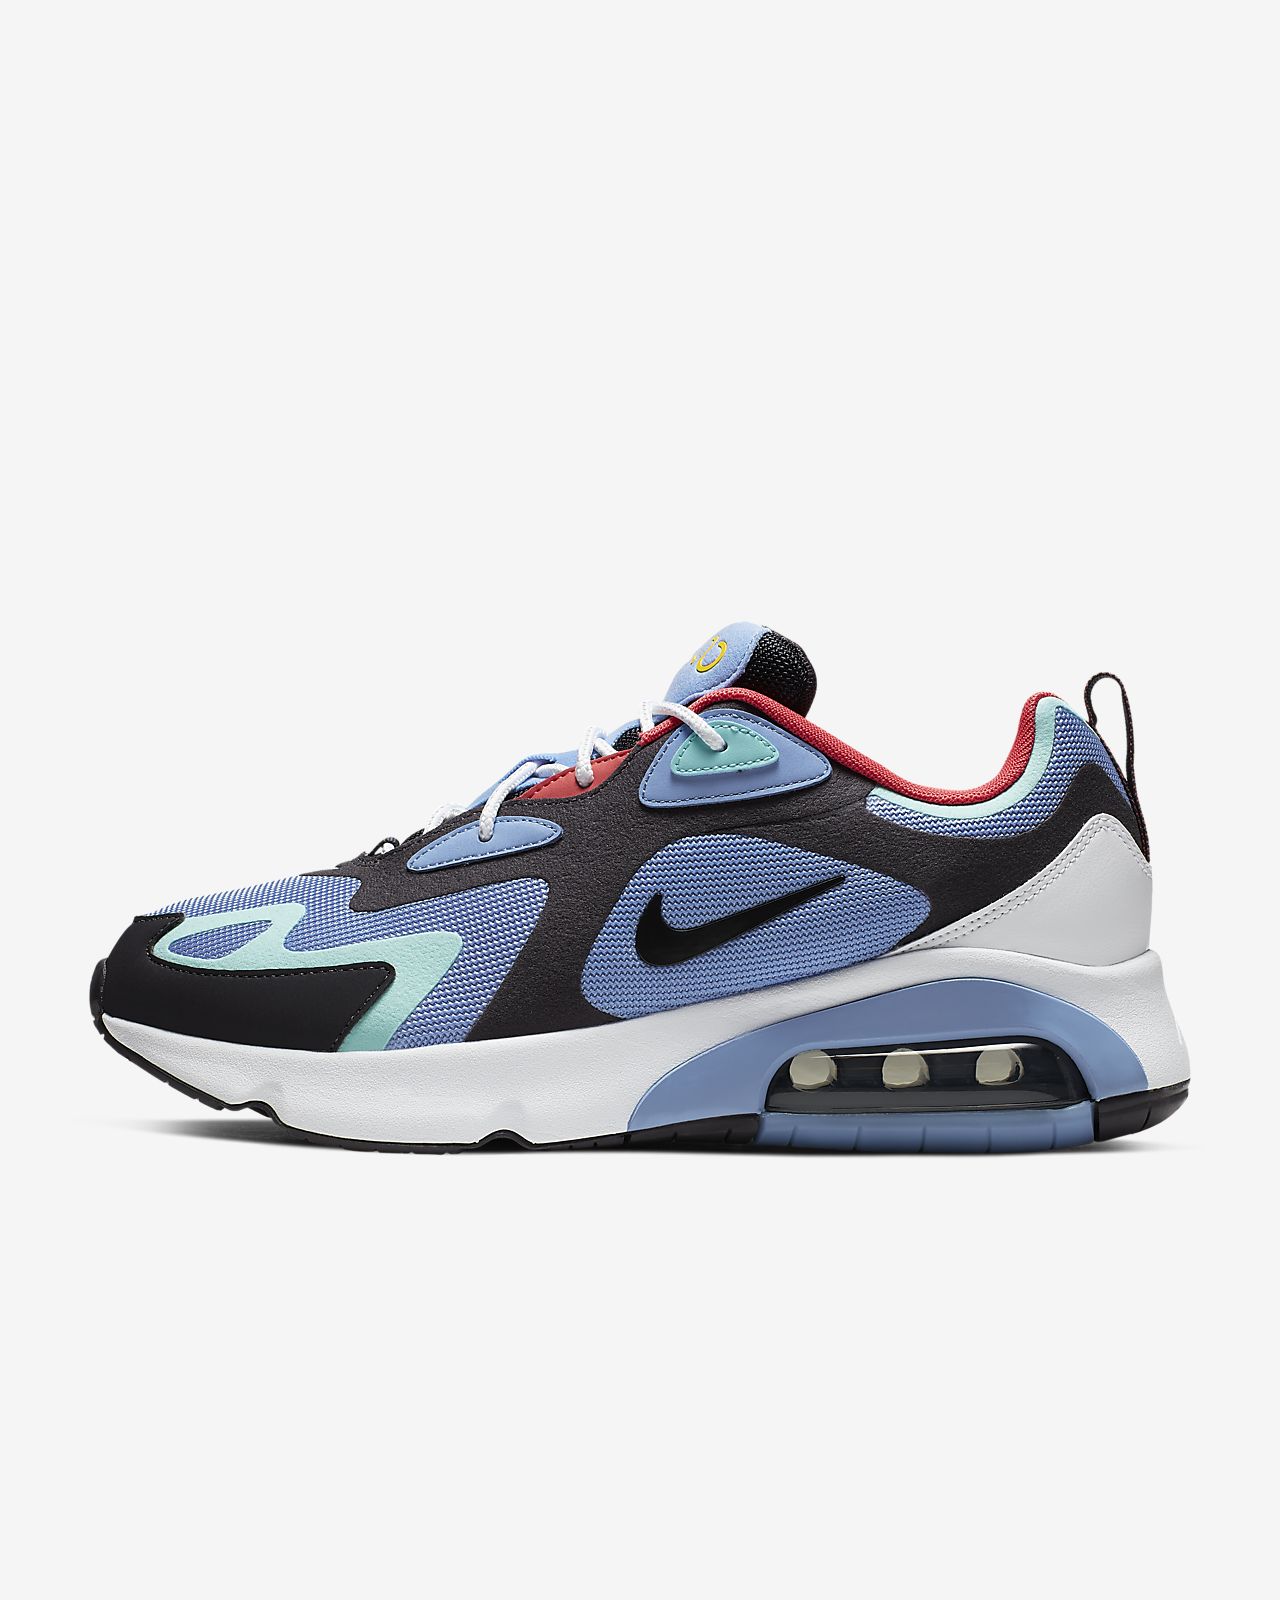 air max 200s white buy clothes shoes online